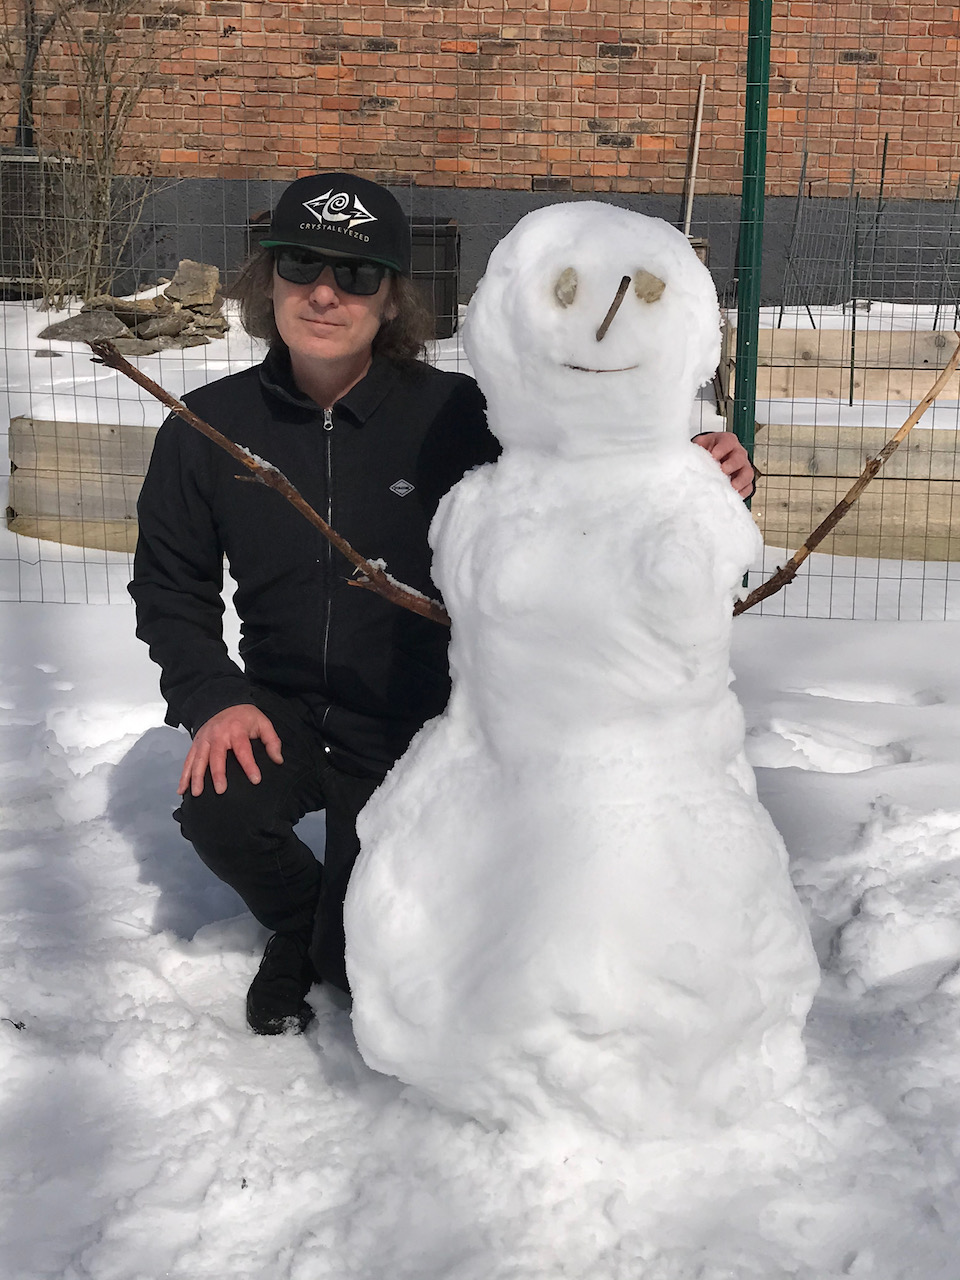 Mark Bray with a snow person February 2021